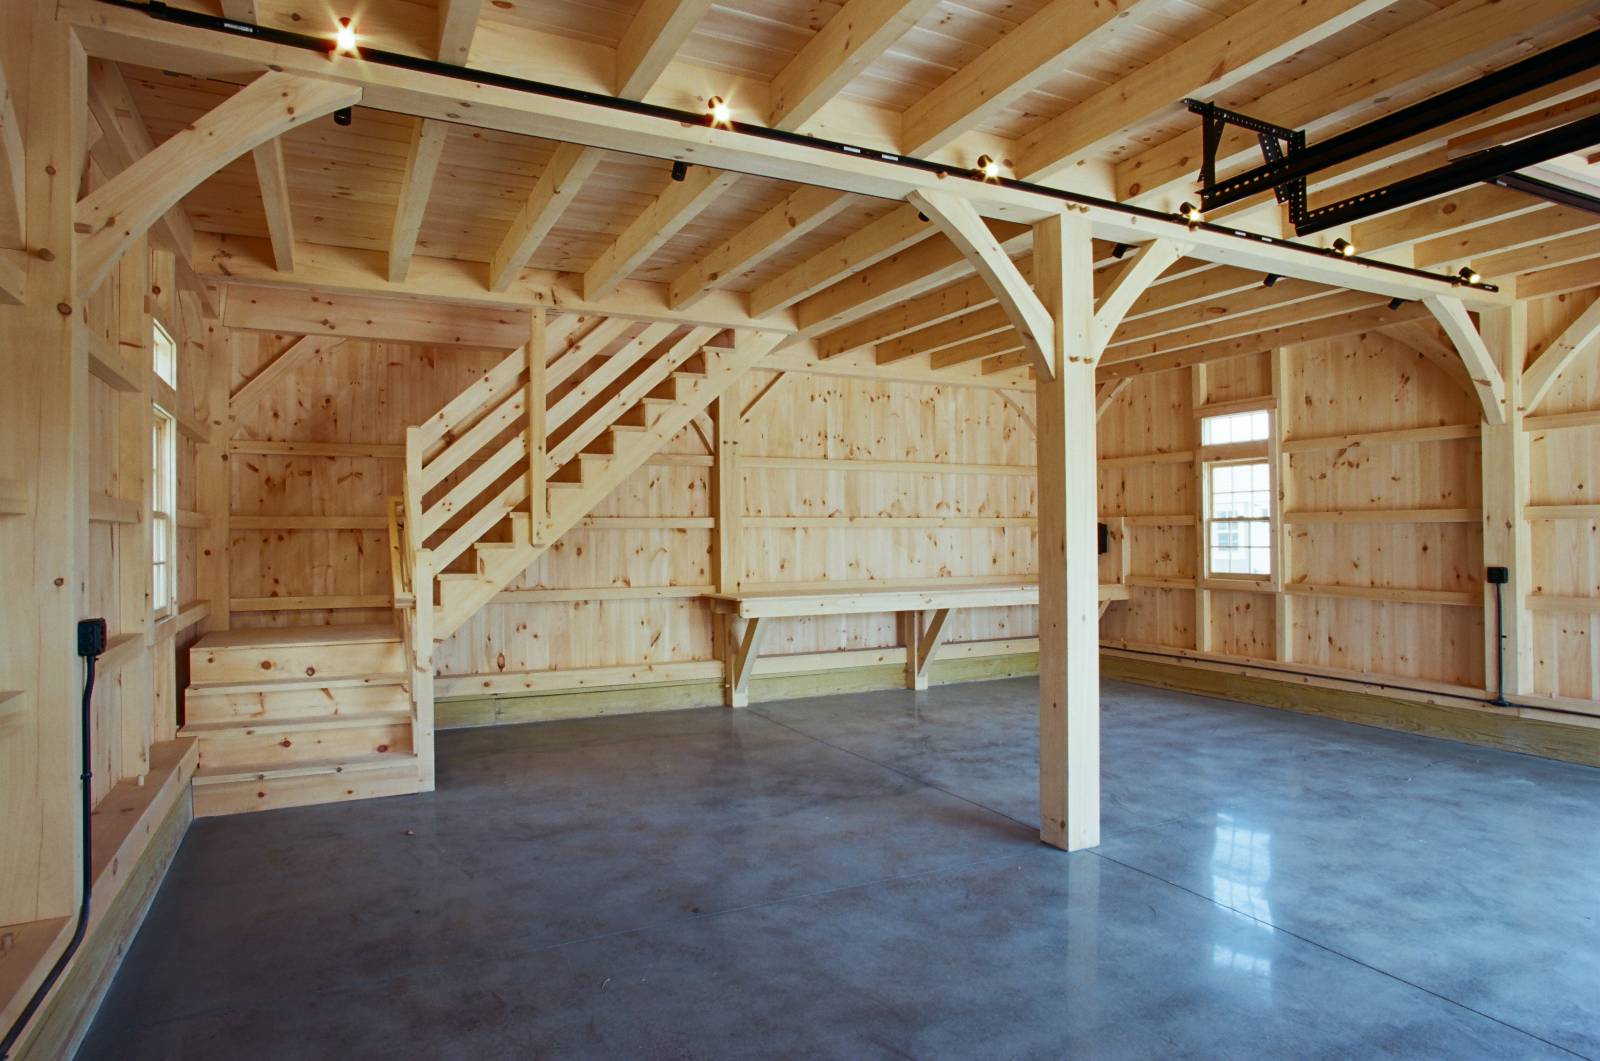 Interior of the Carriage Barn first floor